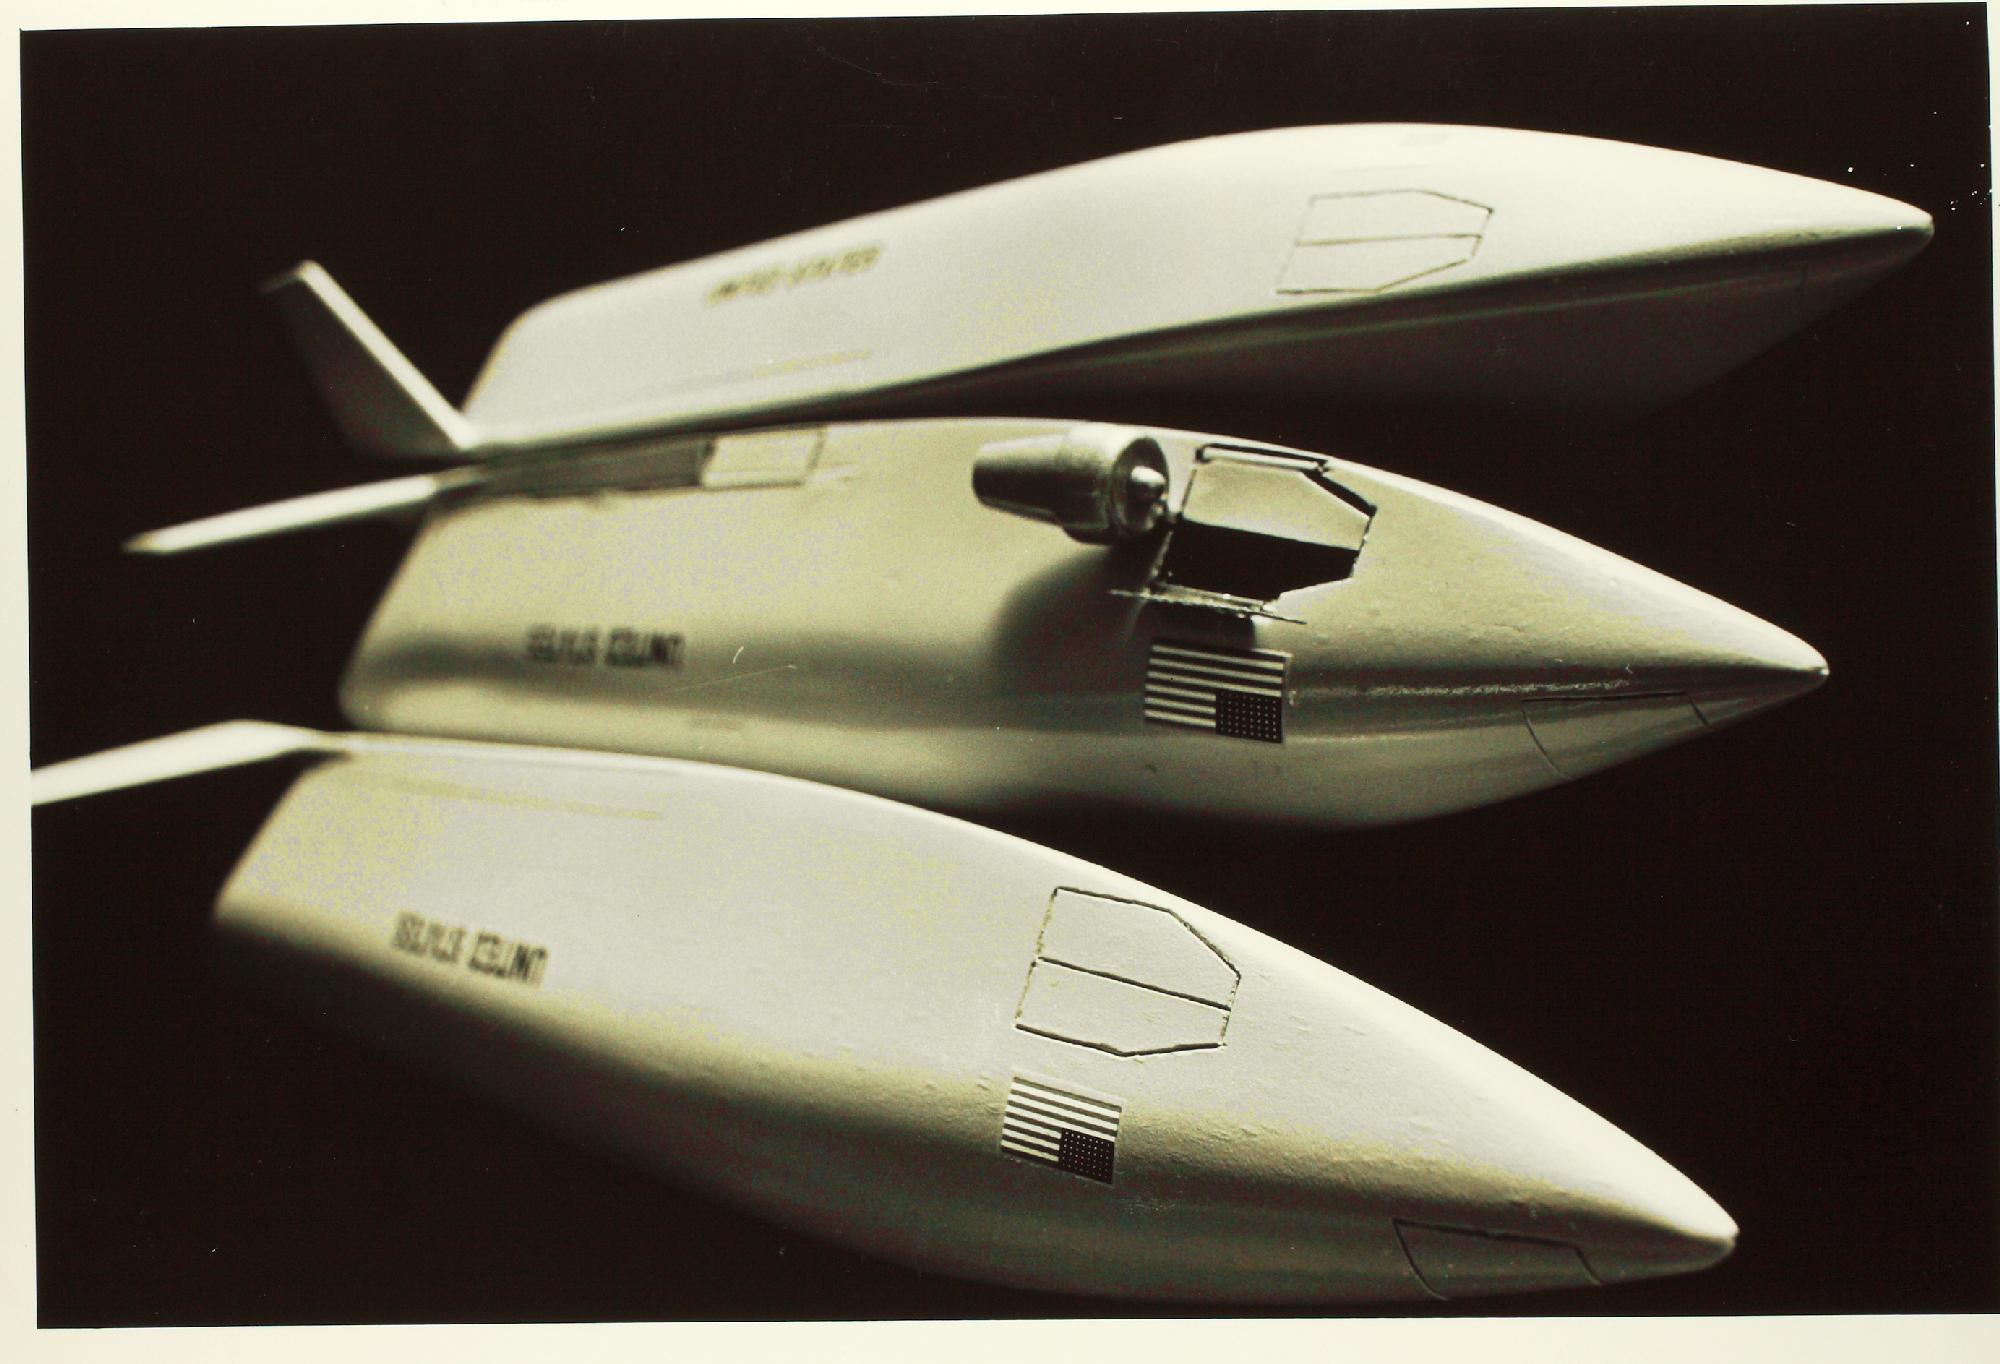 Concept Art From The Shuttle Programs Early Days